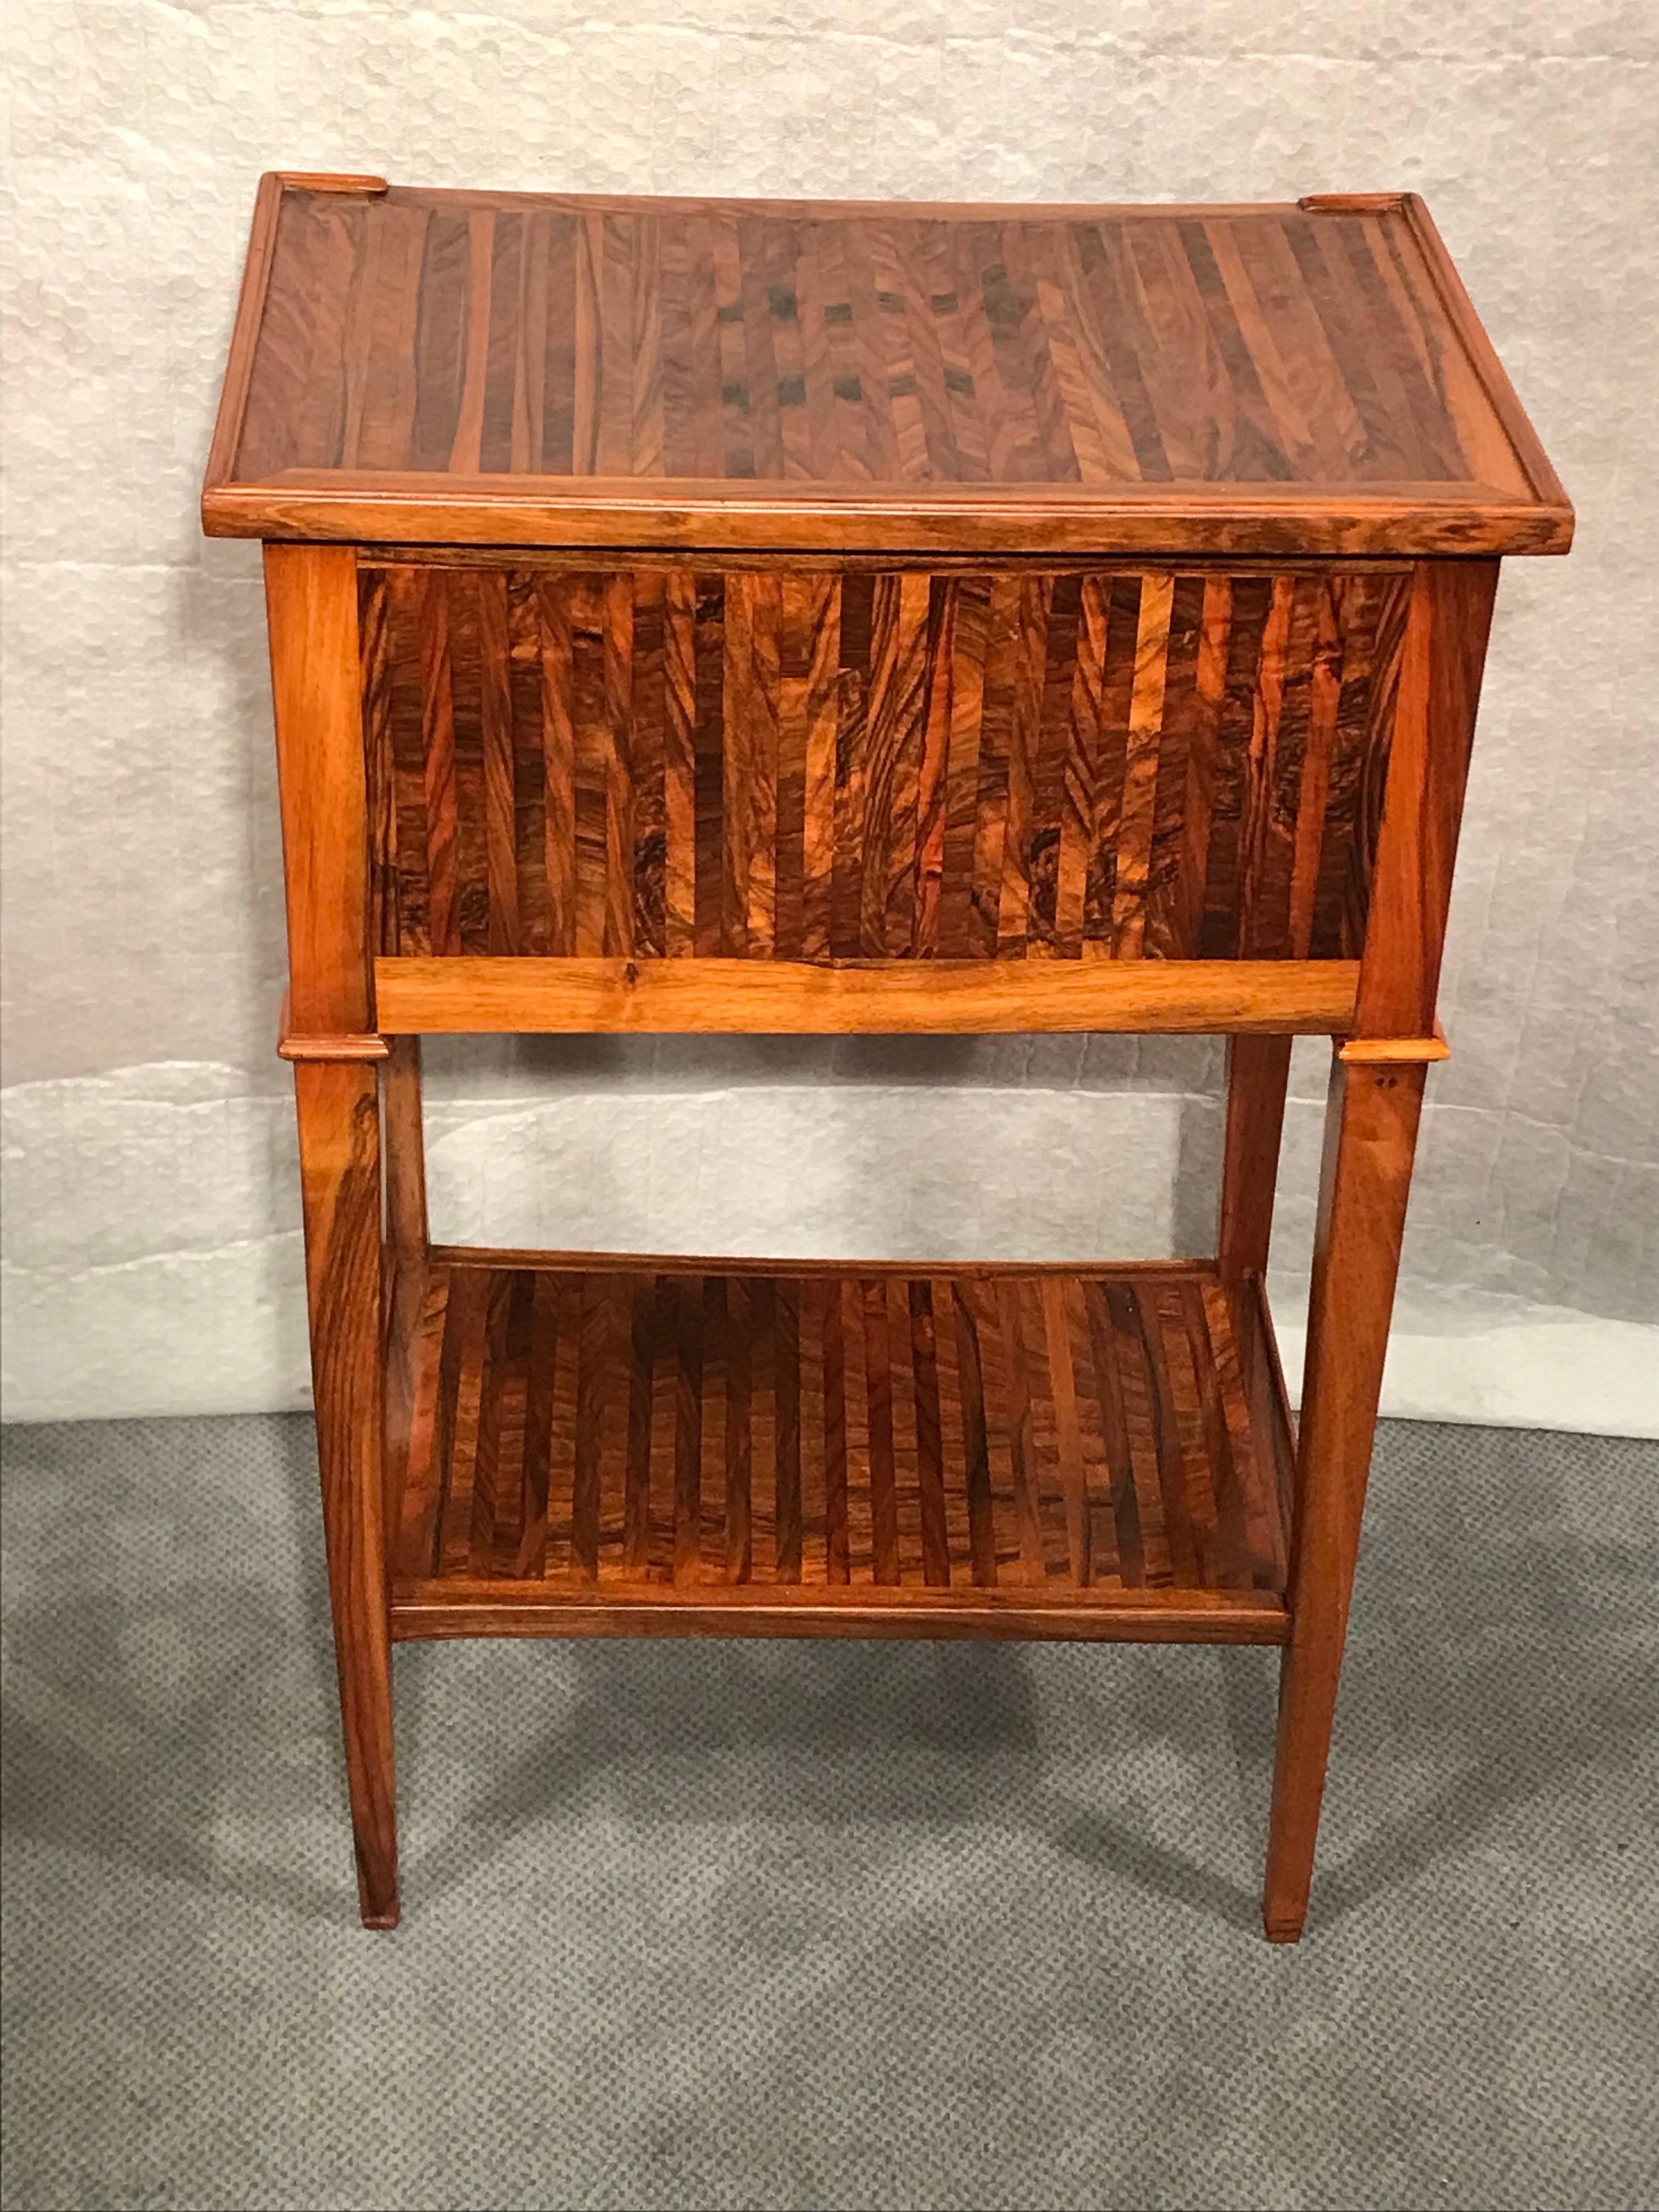 This small chest of drawers or nightstand dates back to around 1790-1800. It comes from Germany. The small chest of drawers stands on four slender pointed legs. It has two drawers and a shelf in the lower part. The special feature of this unique